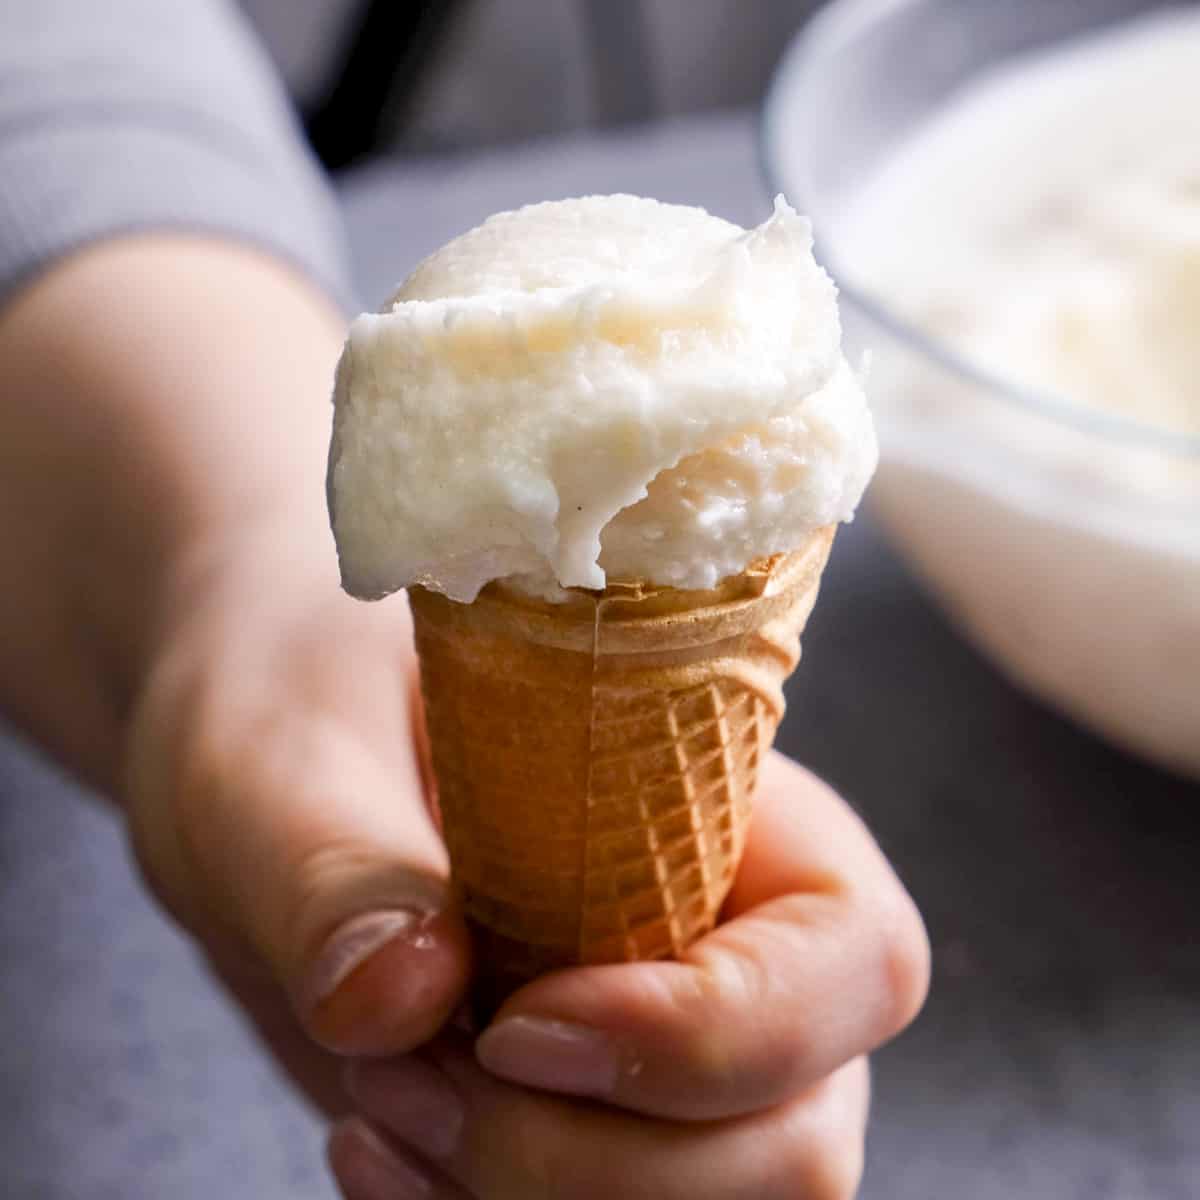 A woman hand holding ice cream on the cone.